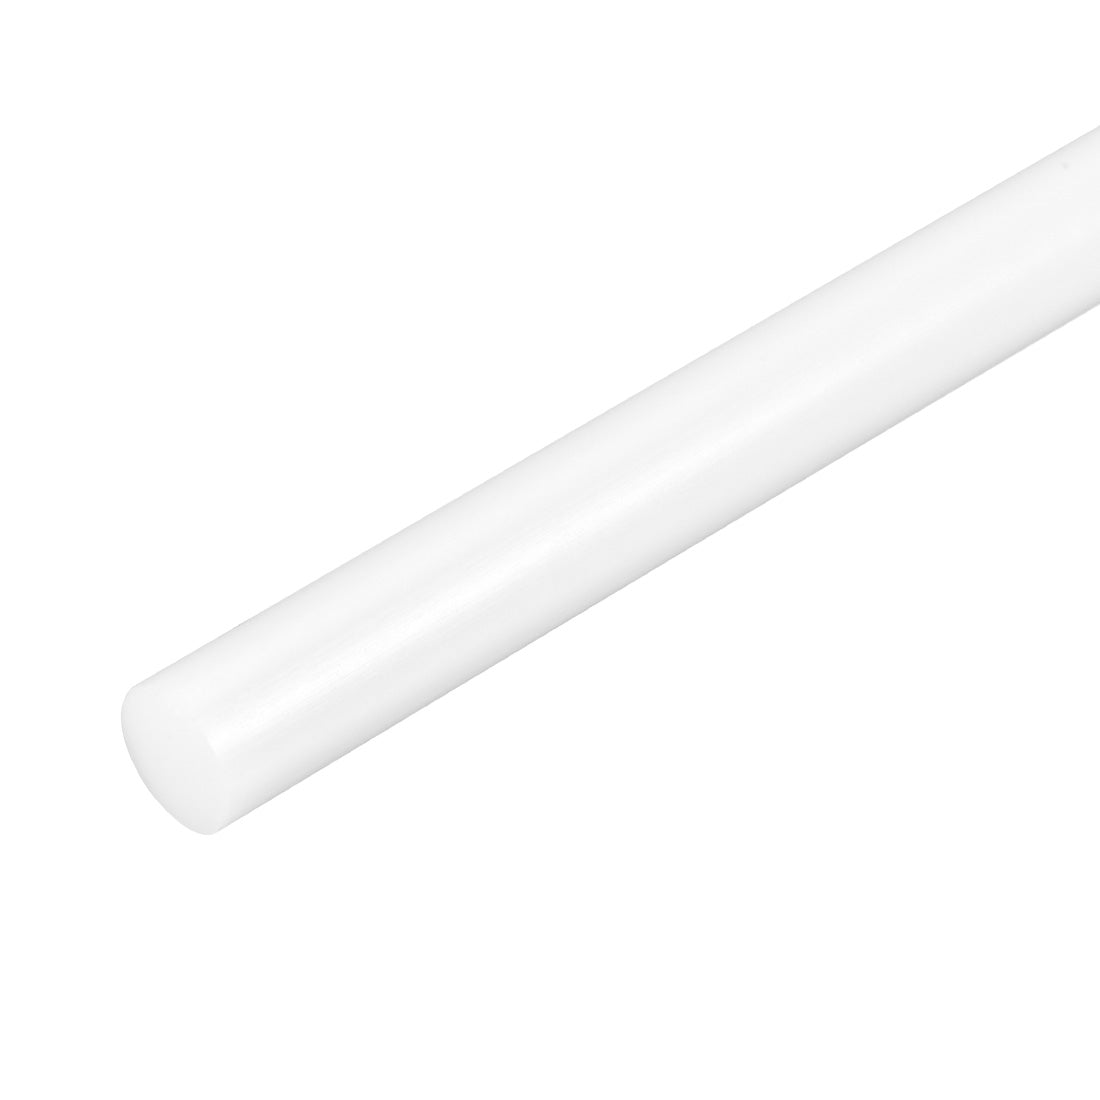 uxcell Uxcell Plastic Round Rod,15mm Dia 50cm White Engineering Plastic Round Bar